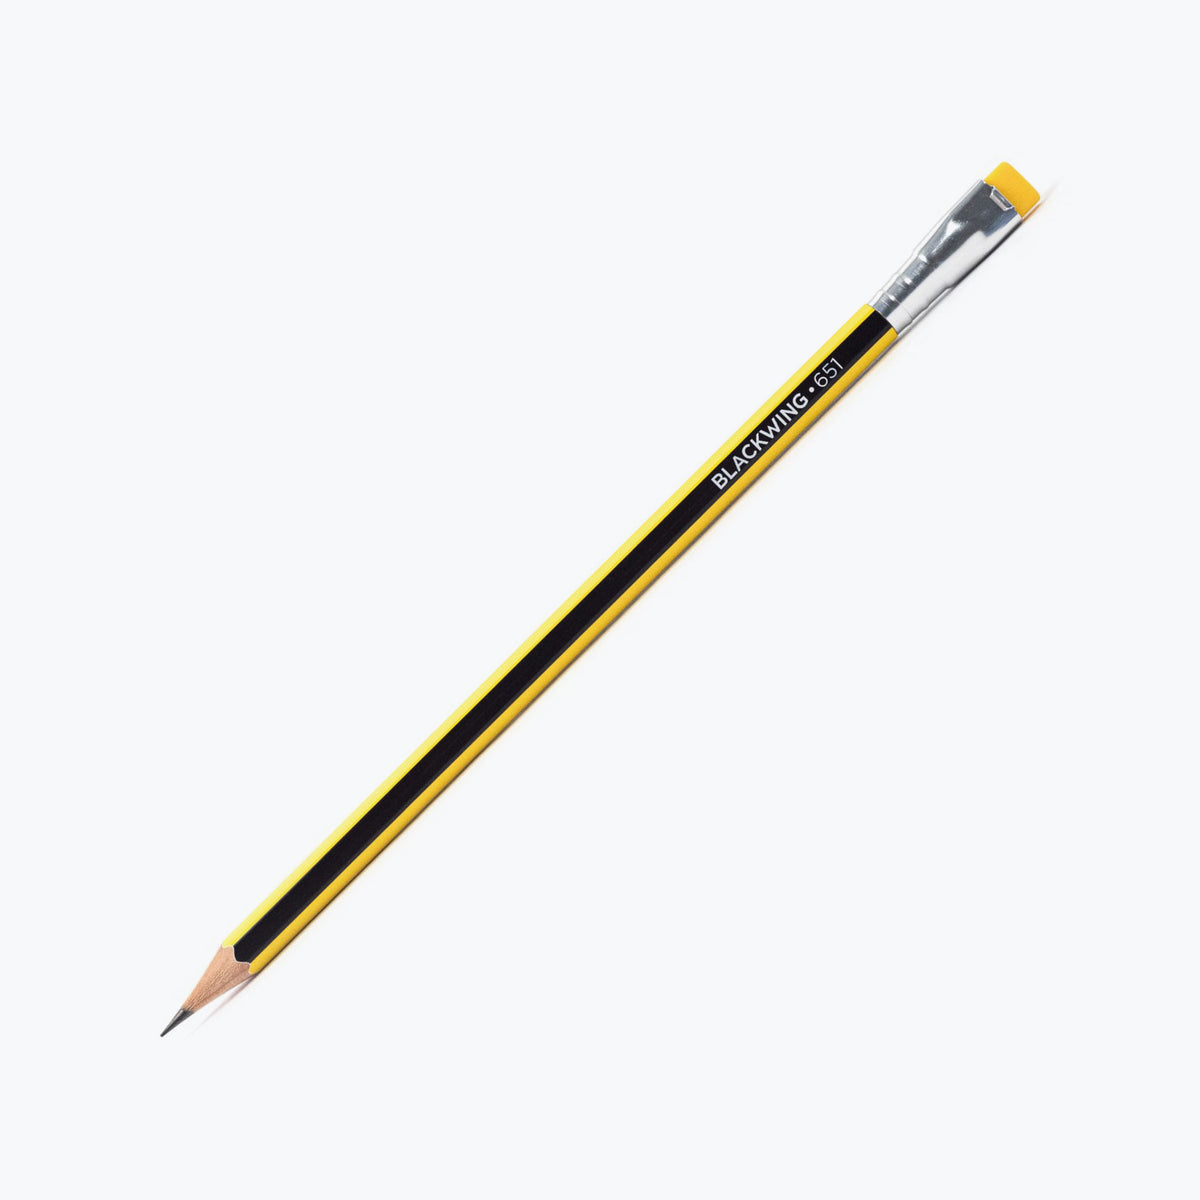 Palomino Blackwing - Pencil - Volume 651 - Pack of 2 (Limited Edition)